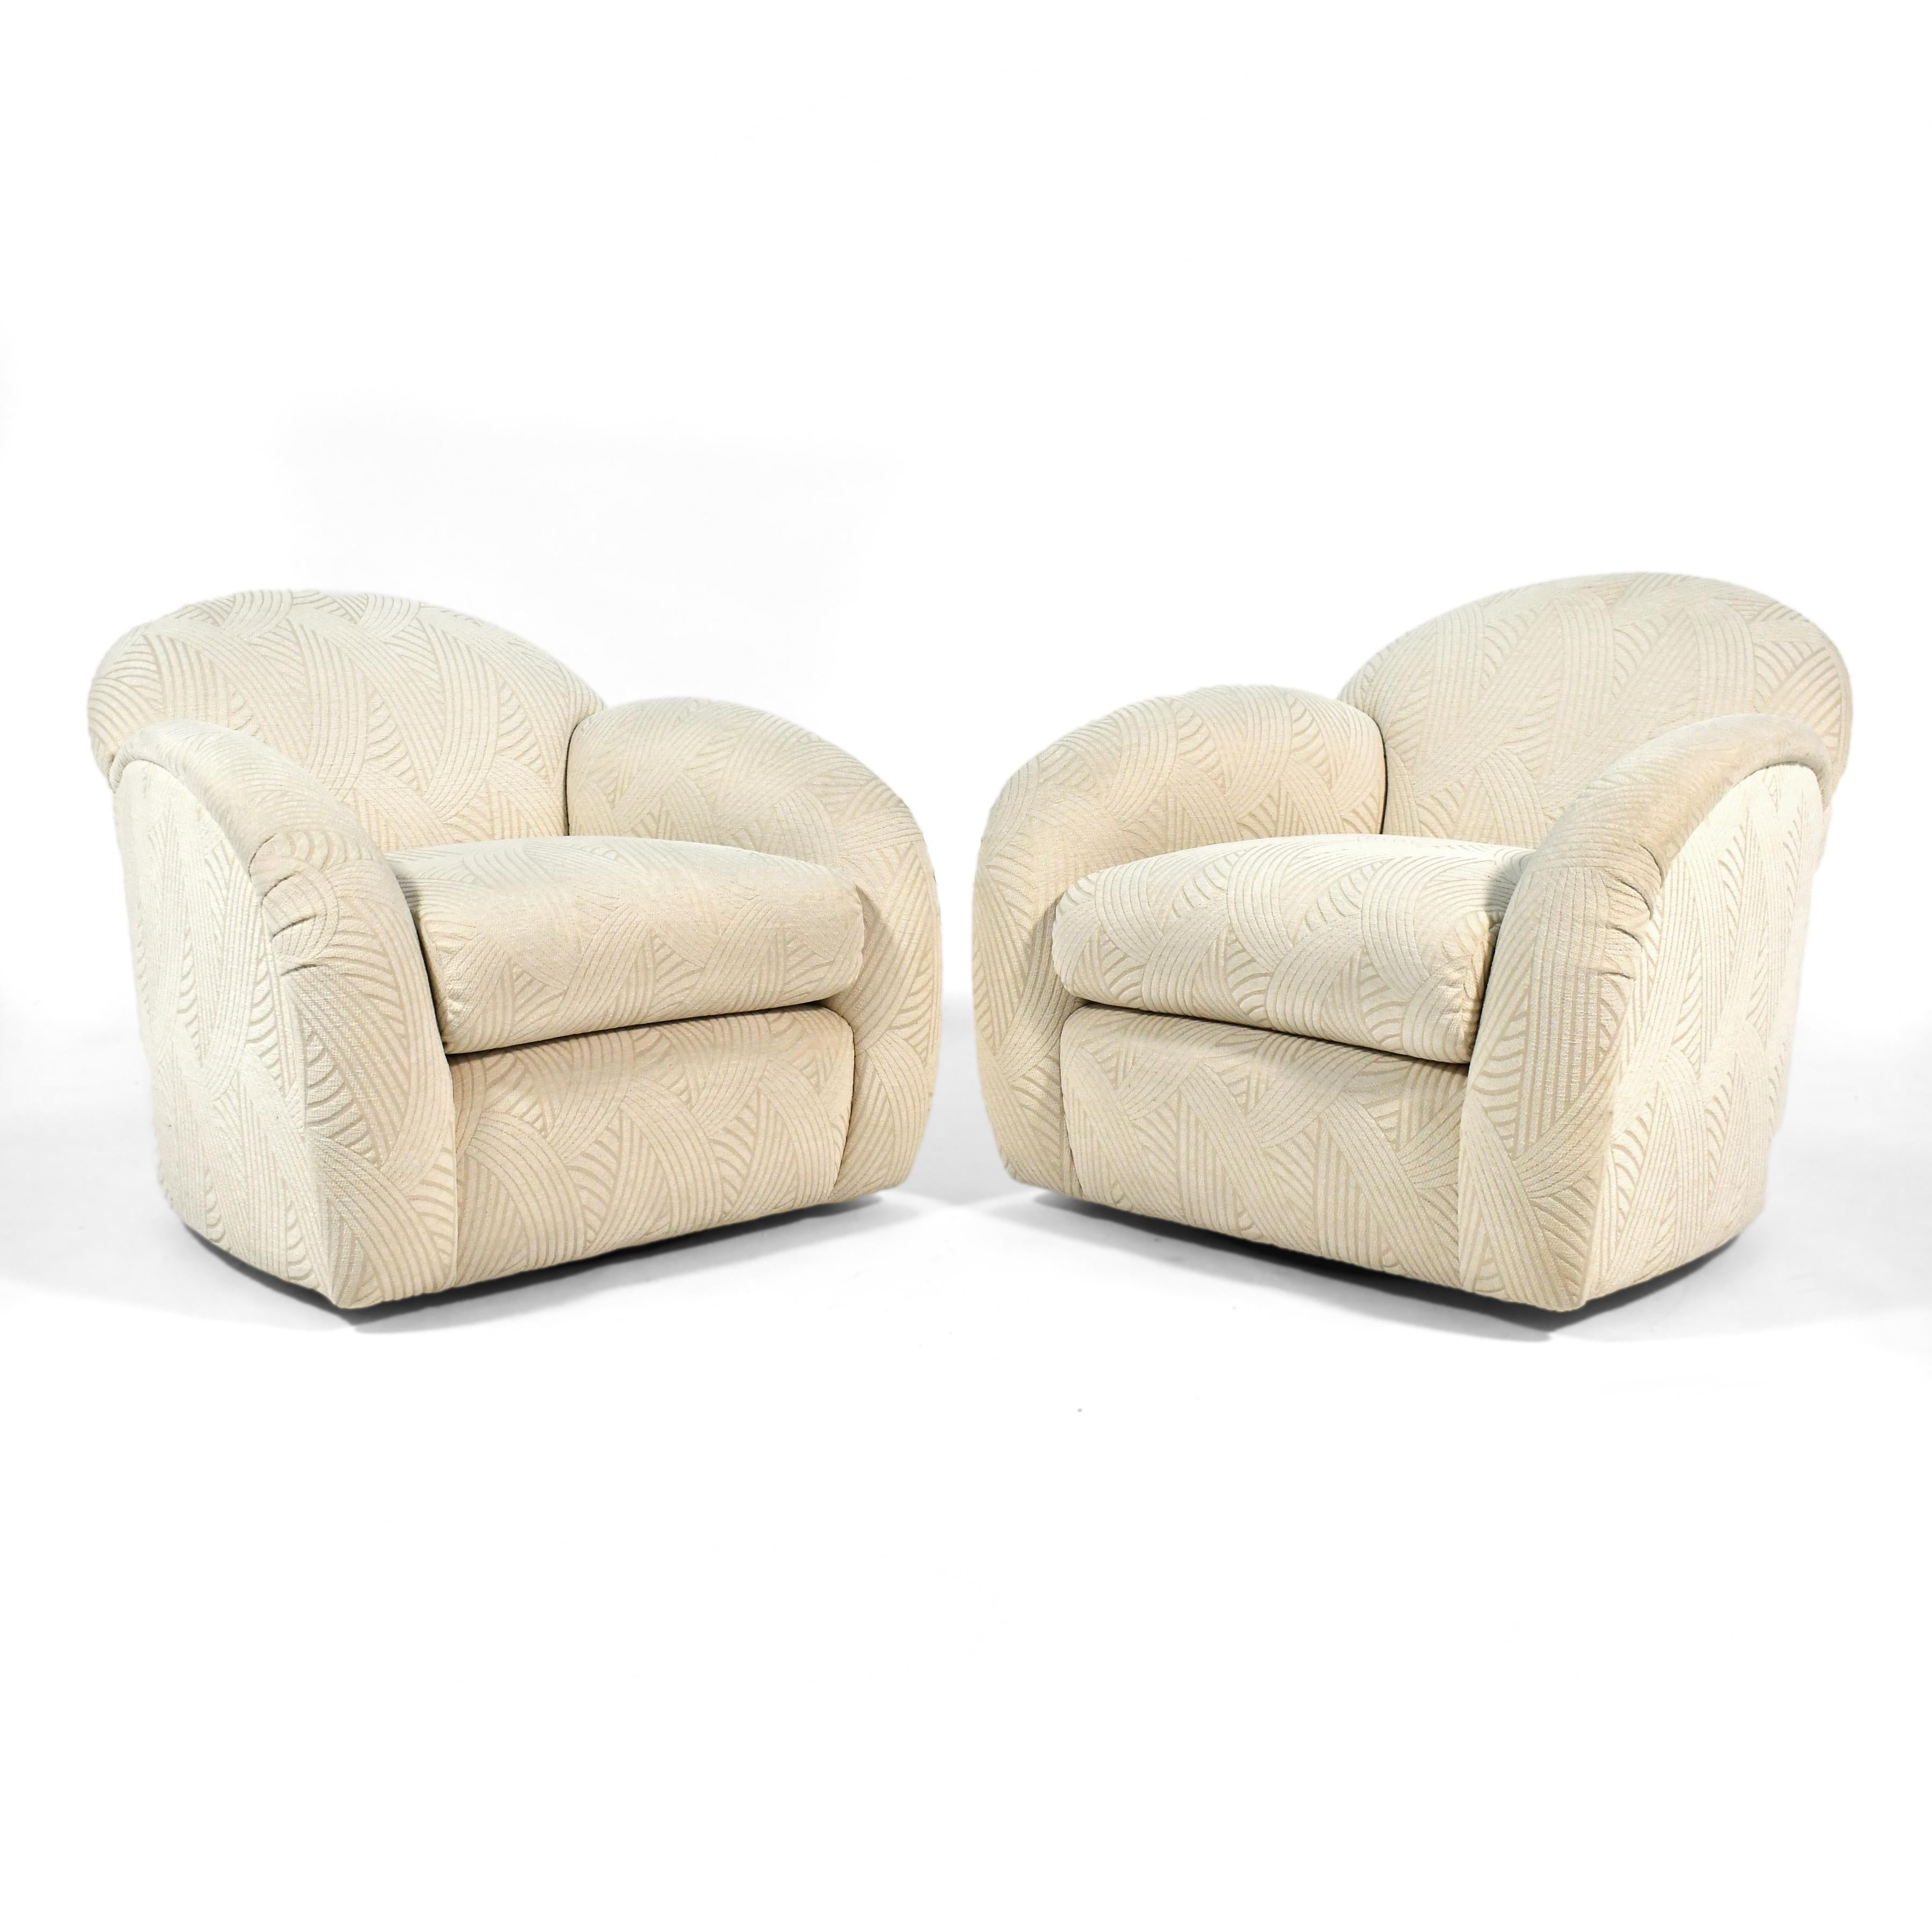 This handsome pair of lounge chairs have an elegant and dynamic shape. They have swivel function, with the recessed base lending them a floating appearance. They were expertly crafted by Interior Crafts in Chicago and are upholstered in a patterned